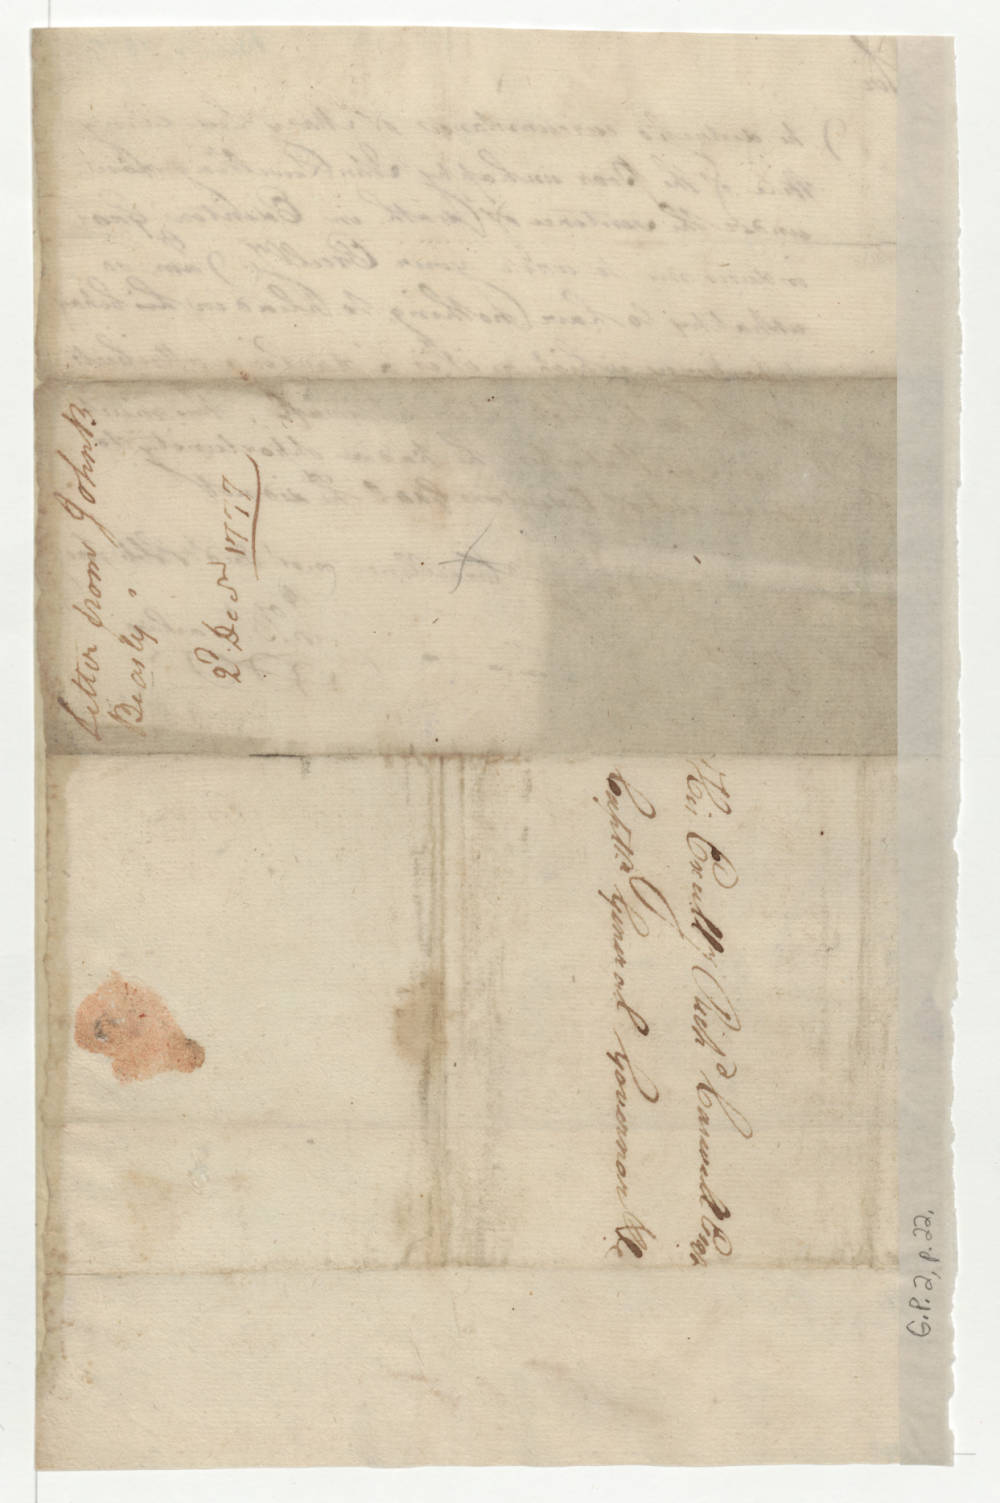 Letter from John Baptist Beasley to Richard Caswell, 2 December 1777, page 2